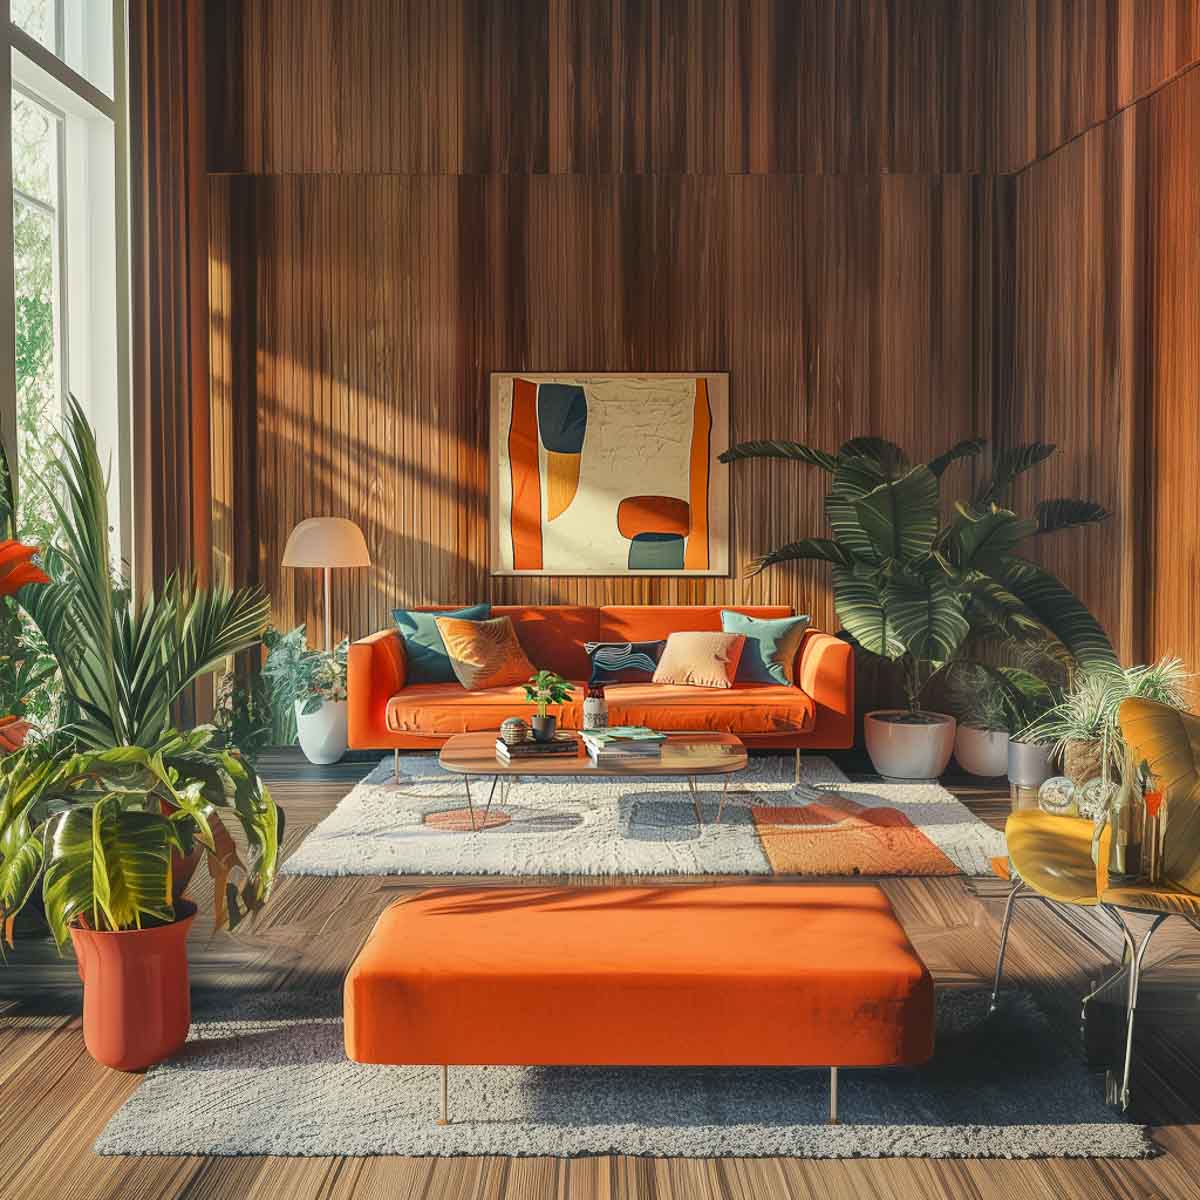 a mid century modern living room with a wood paneled wall behind an orange sofa and mid century accessories